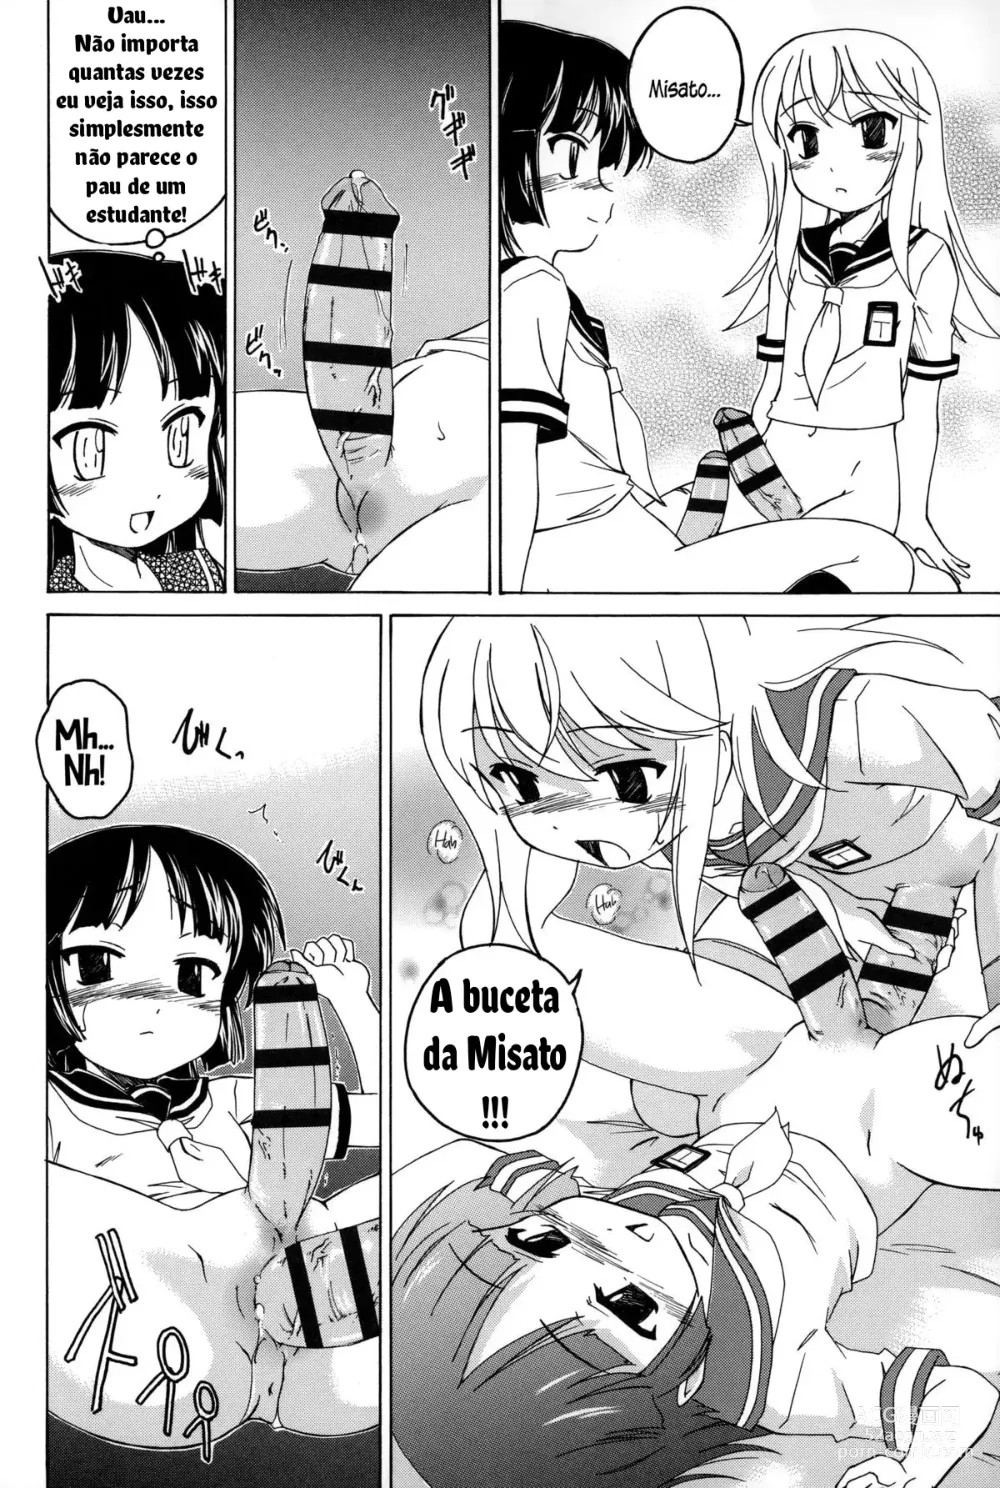 Page 4 of doujinshi The secret of Girls flowers